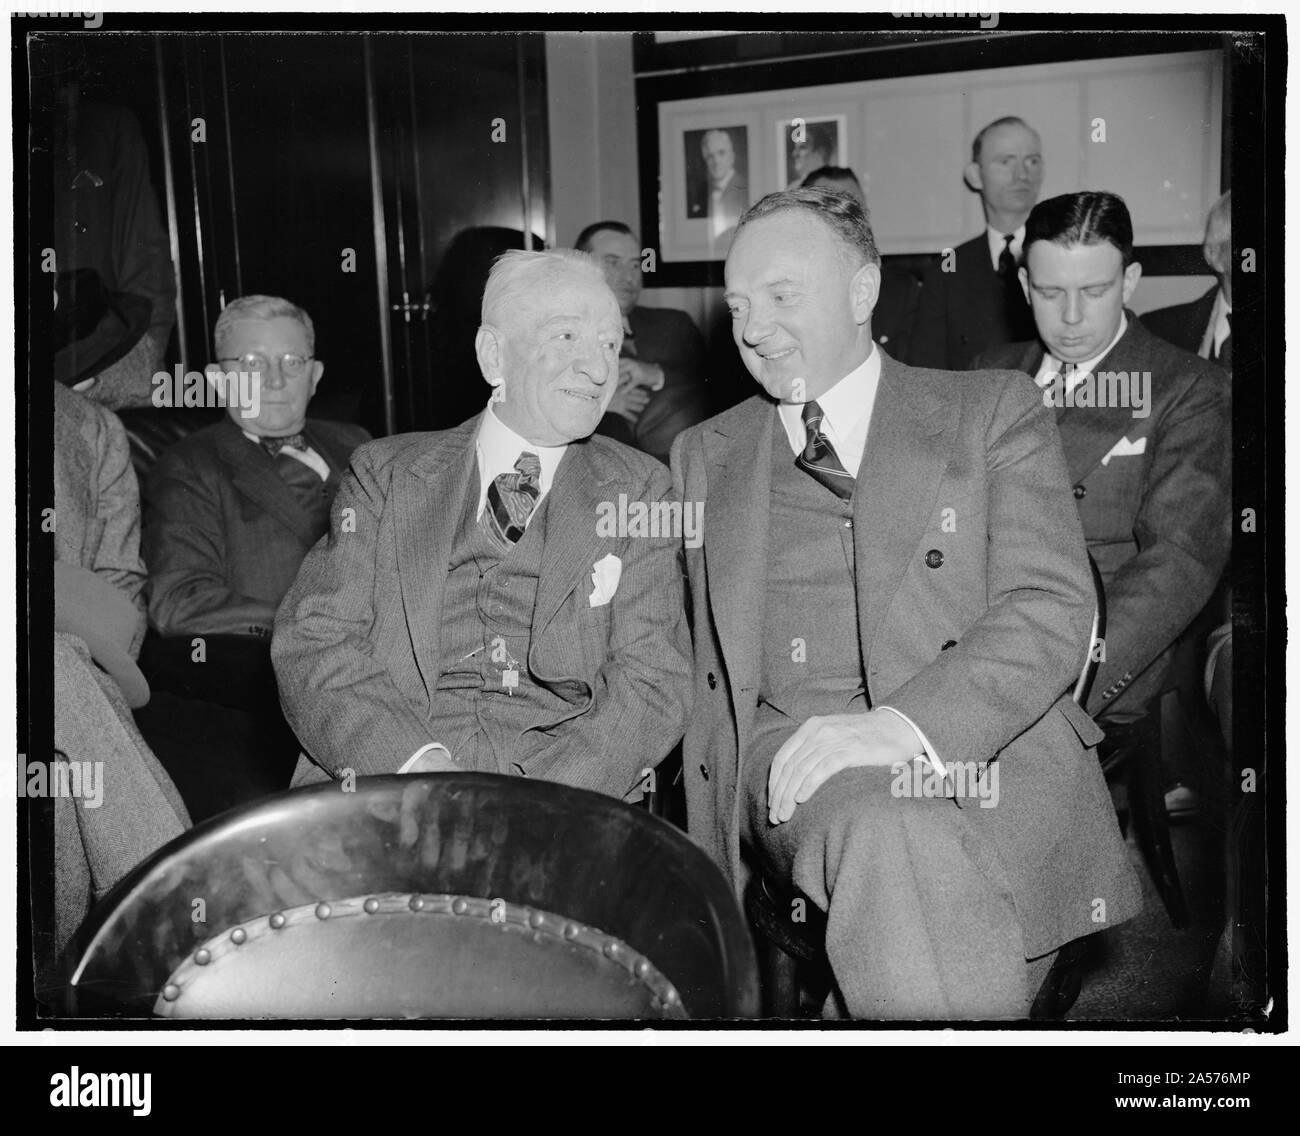 Virginia Senators oppose nomination of Floyd Roberts to federal judgeship. Washington, D.C., Feb. 1. Senators Carter Glass and Harry F. Byrd, who are leading the opposition to the nomination of Floyd Roberts to a Federal District Judgeship in Virginia, are pictured as they listened to testimony before the Senate Judiciary Committee when public hearings on the nomination began, 2-1-39 Stock Photo